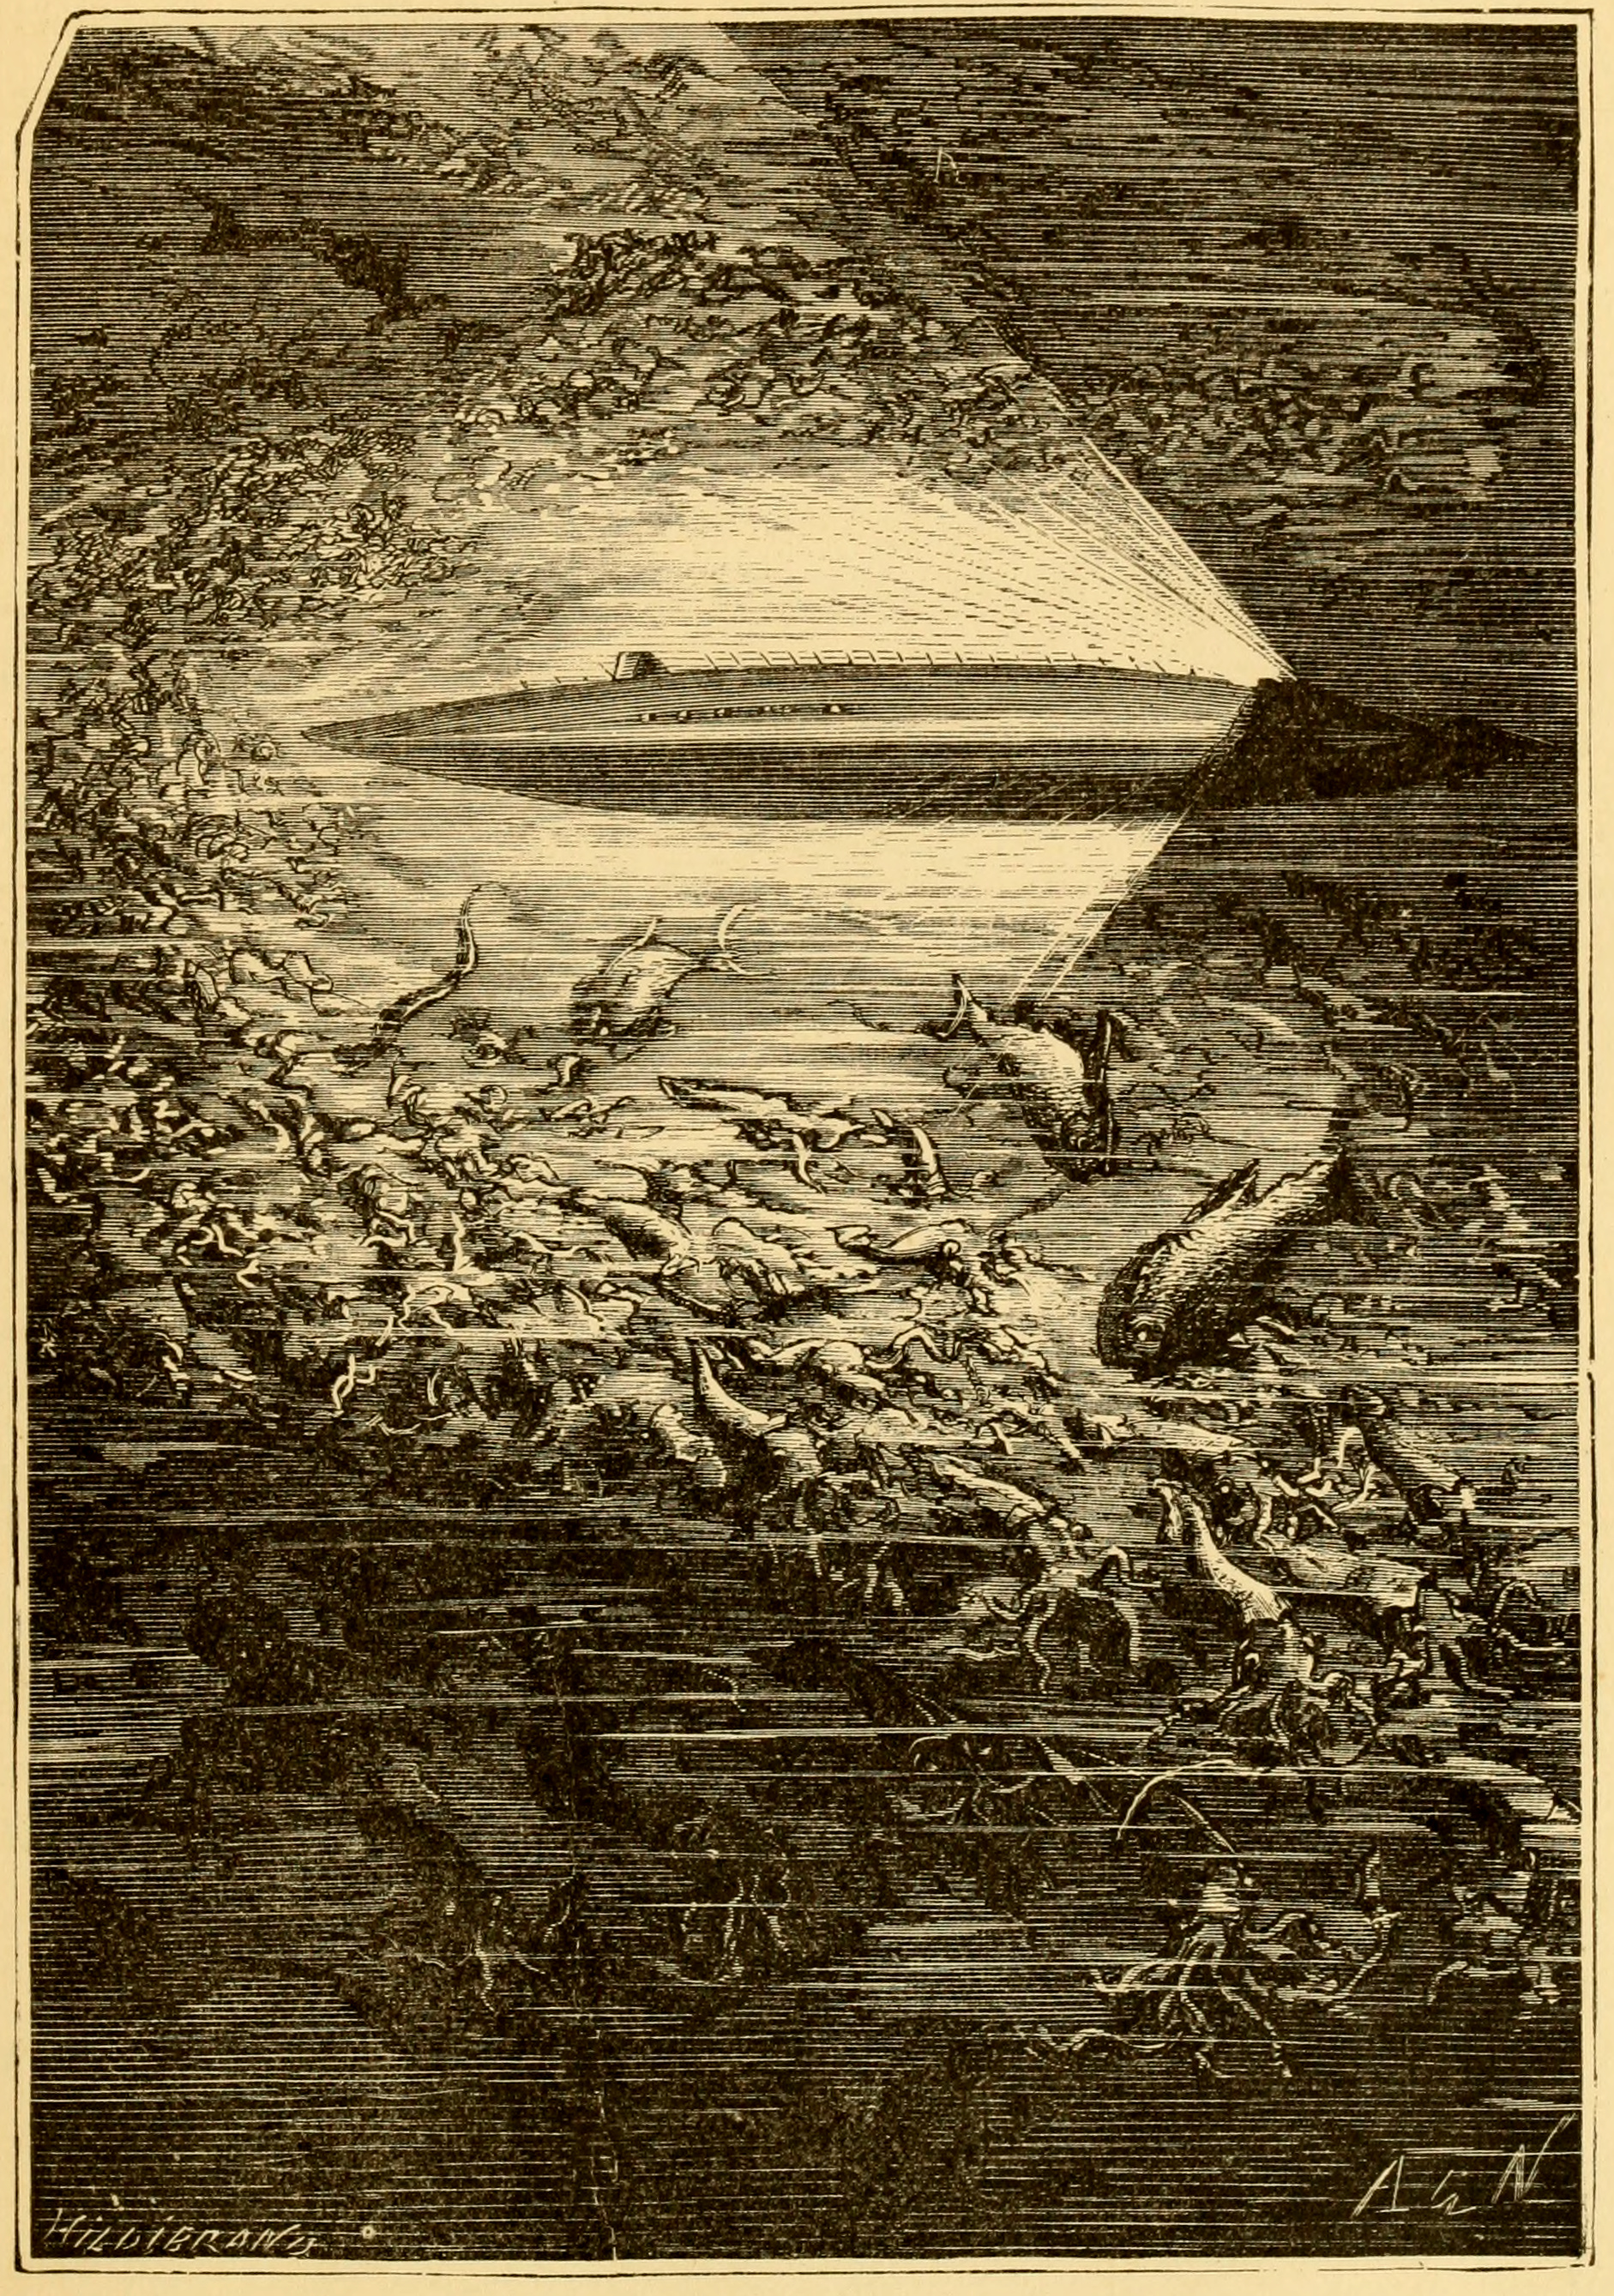 The Nautilus as imagined by Jules Verne. his image was originally featured in the Hetzel edition of 20000 Lieues Sous les Mers, and has also been featured in more recent editions. Taken from Boston Public Library scan of 1875 edition hosted on Internet Archive at https://archive.org/details/twentythousandle1875vern